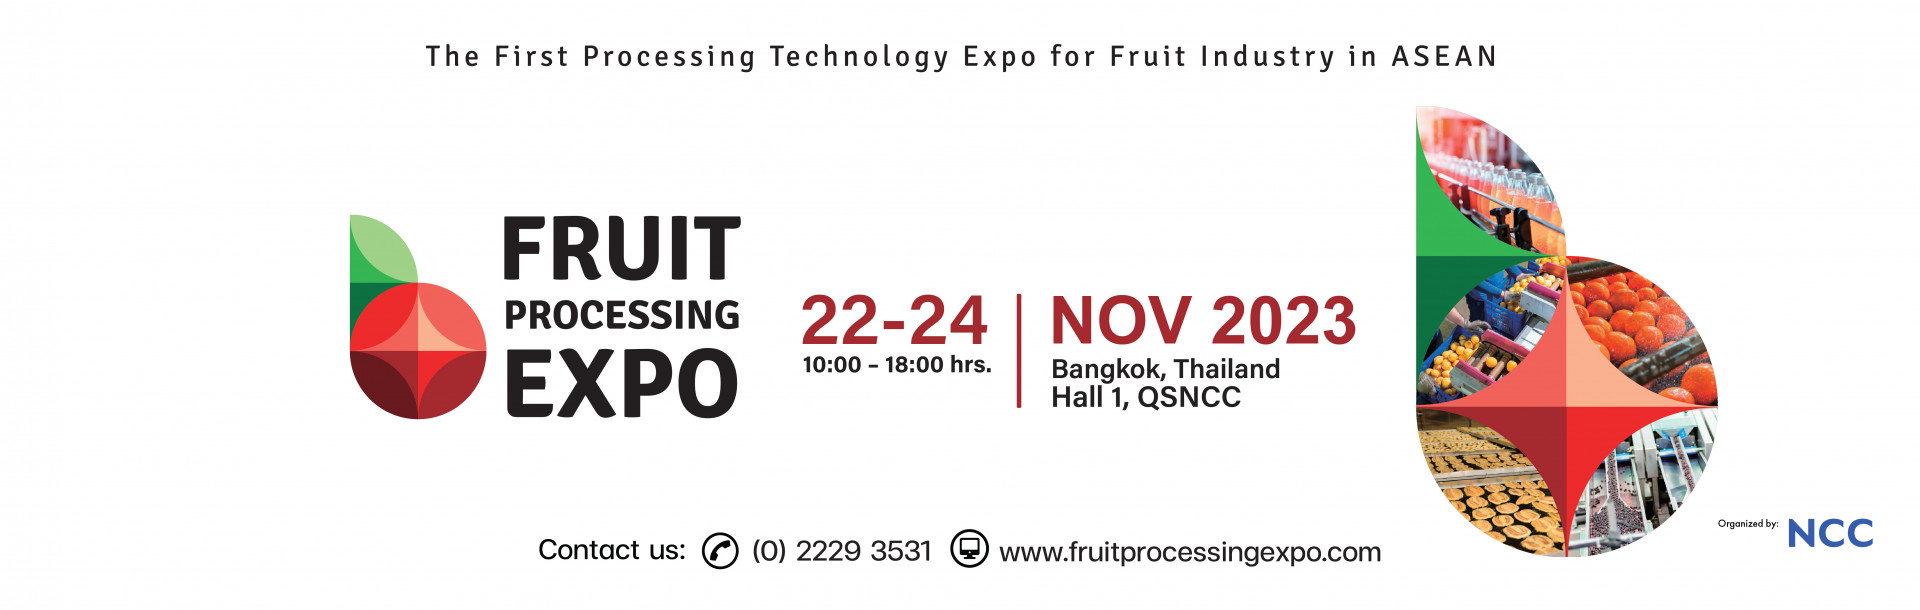 FRUIT PROCESSING EXPO 2023